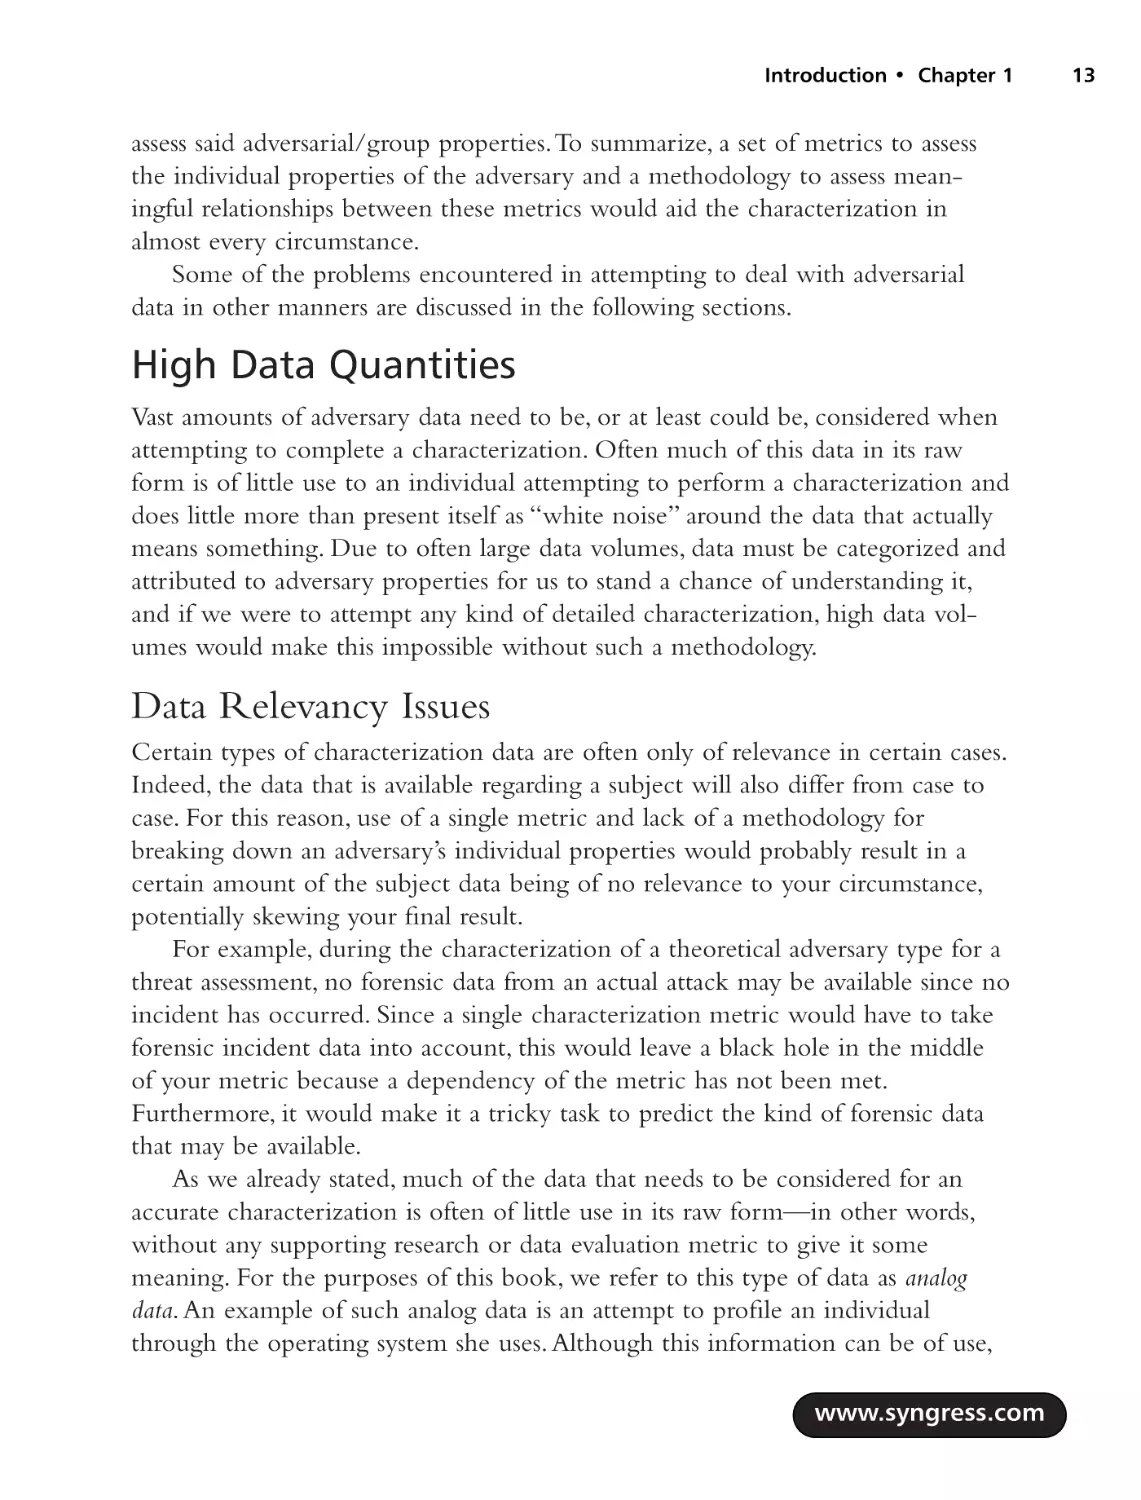 High Data Quantities
Data Relevancy Issues